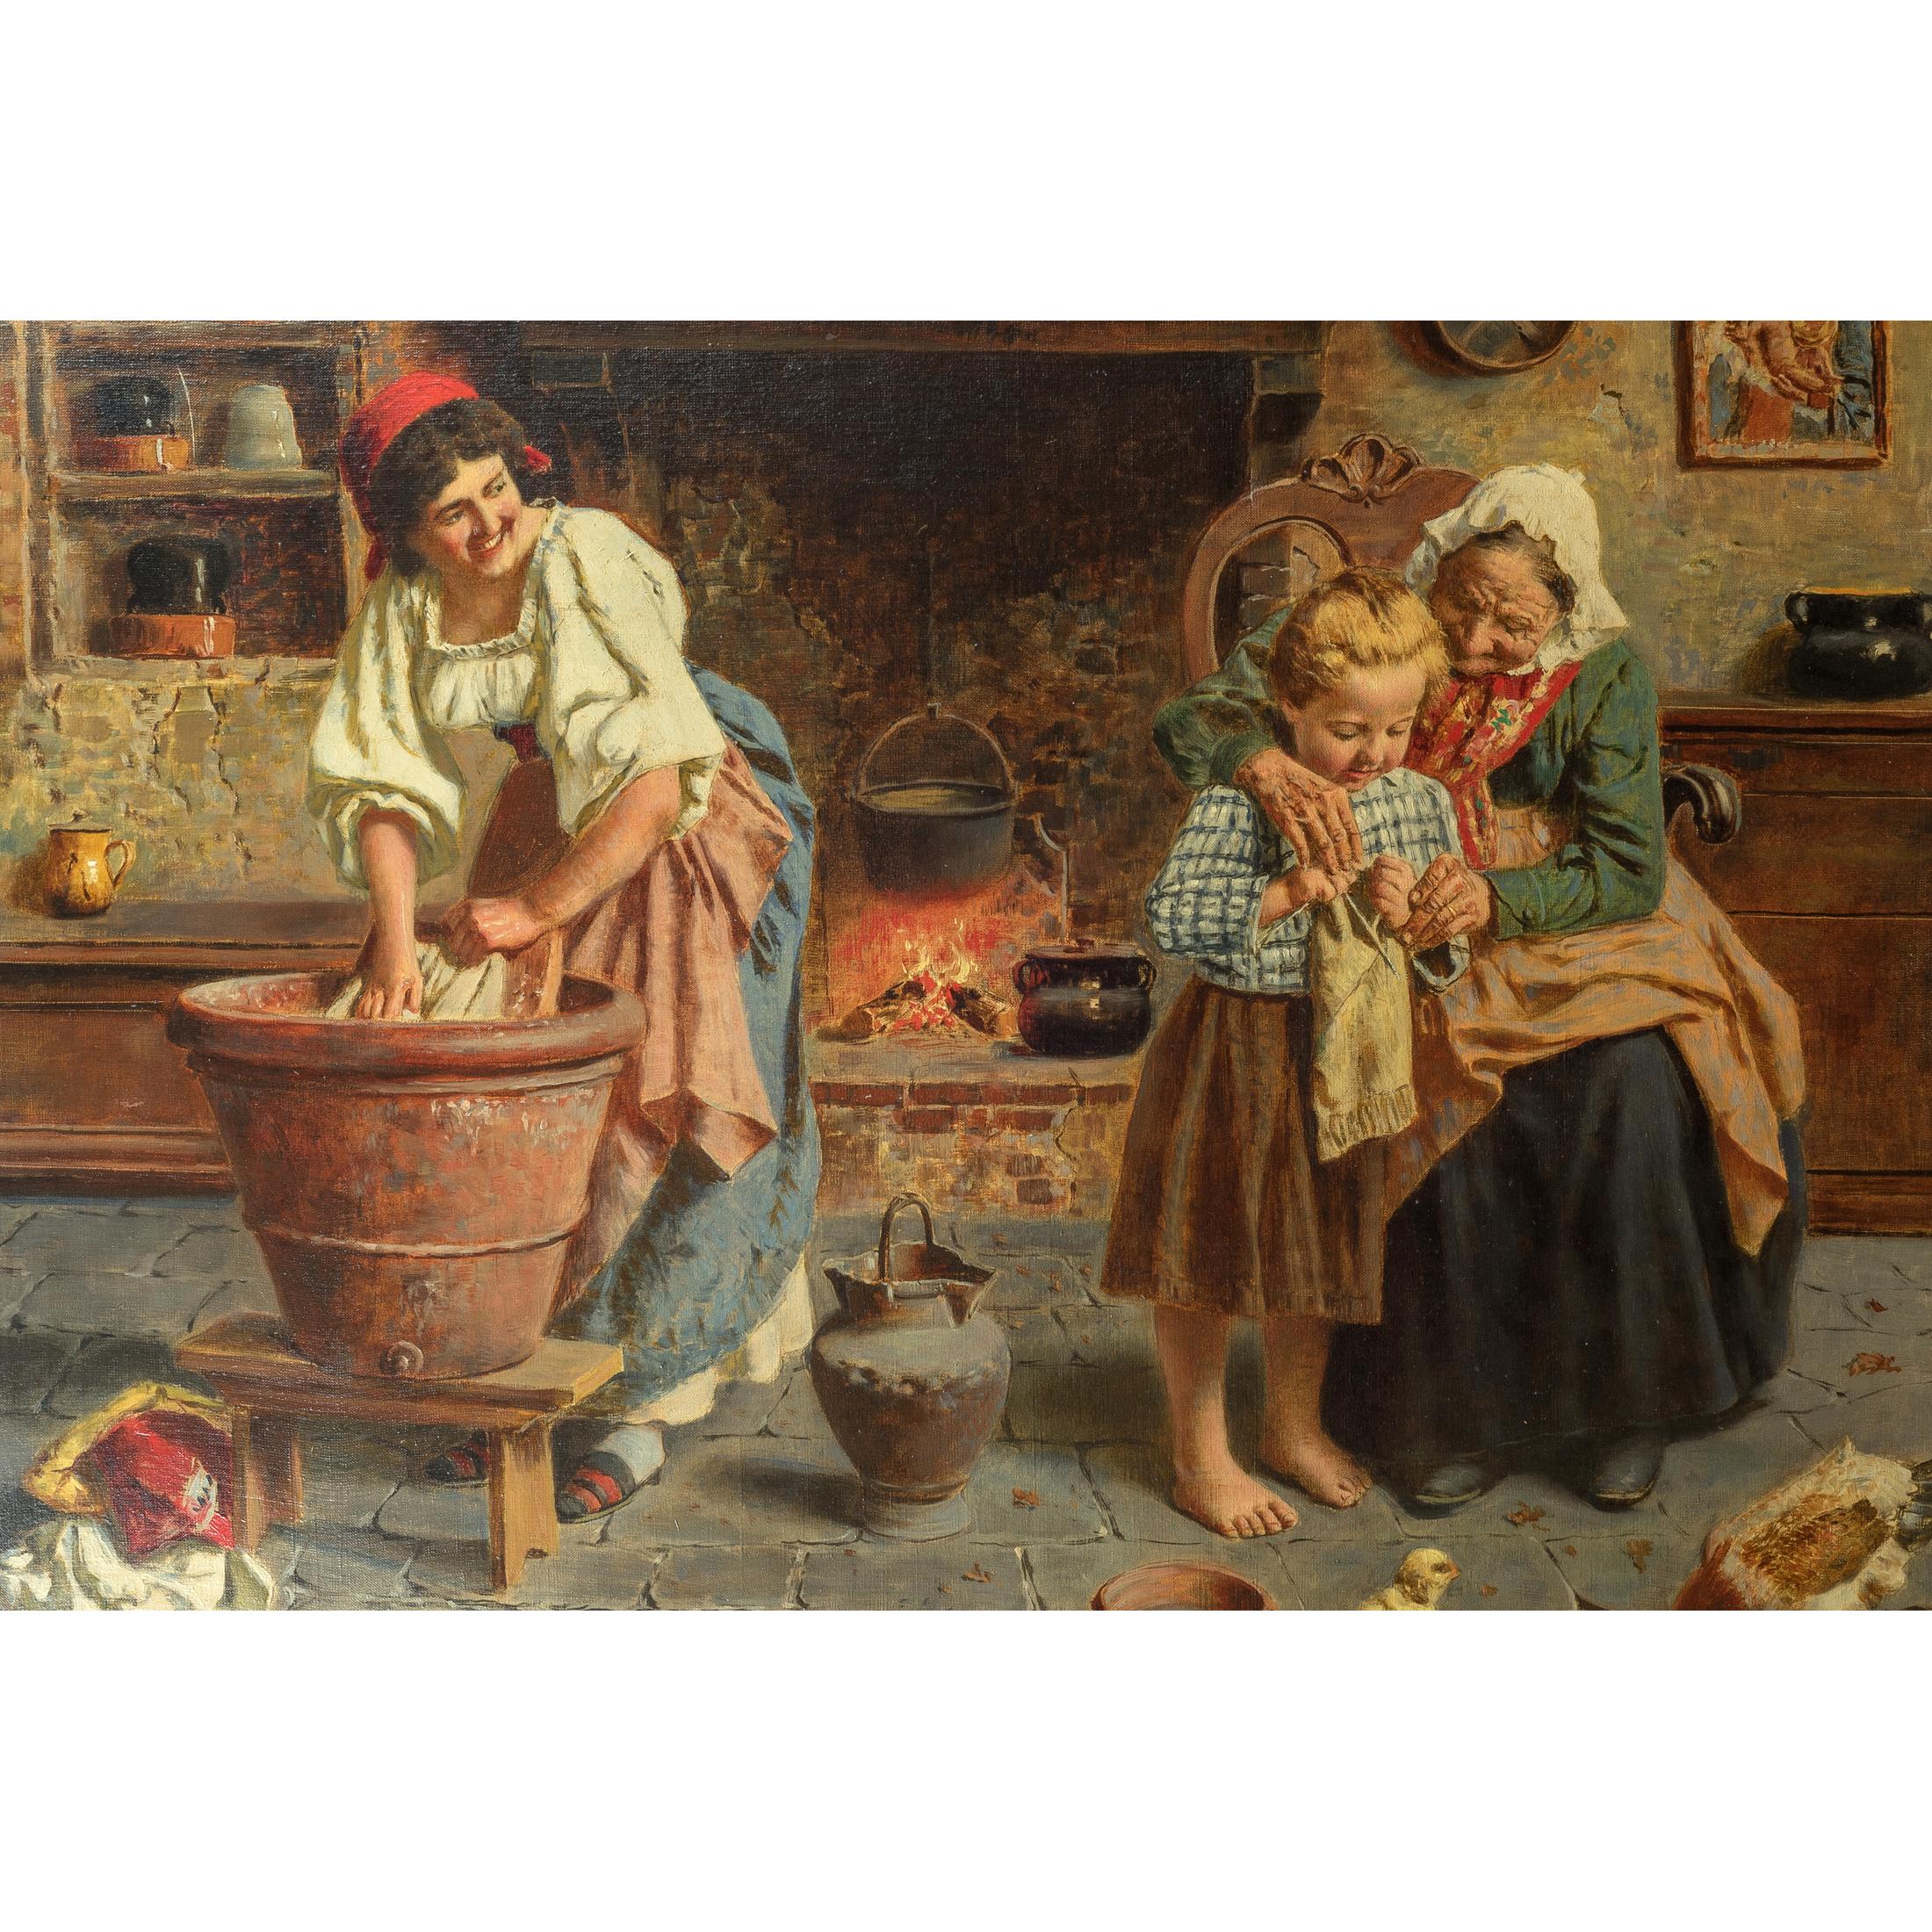 Knitting Lesson - Painting by Eugenio Zampighi